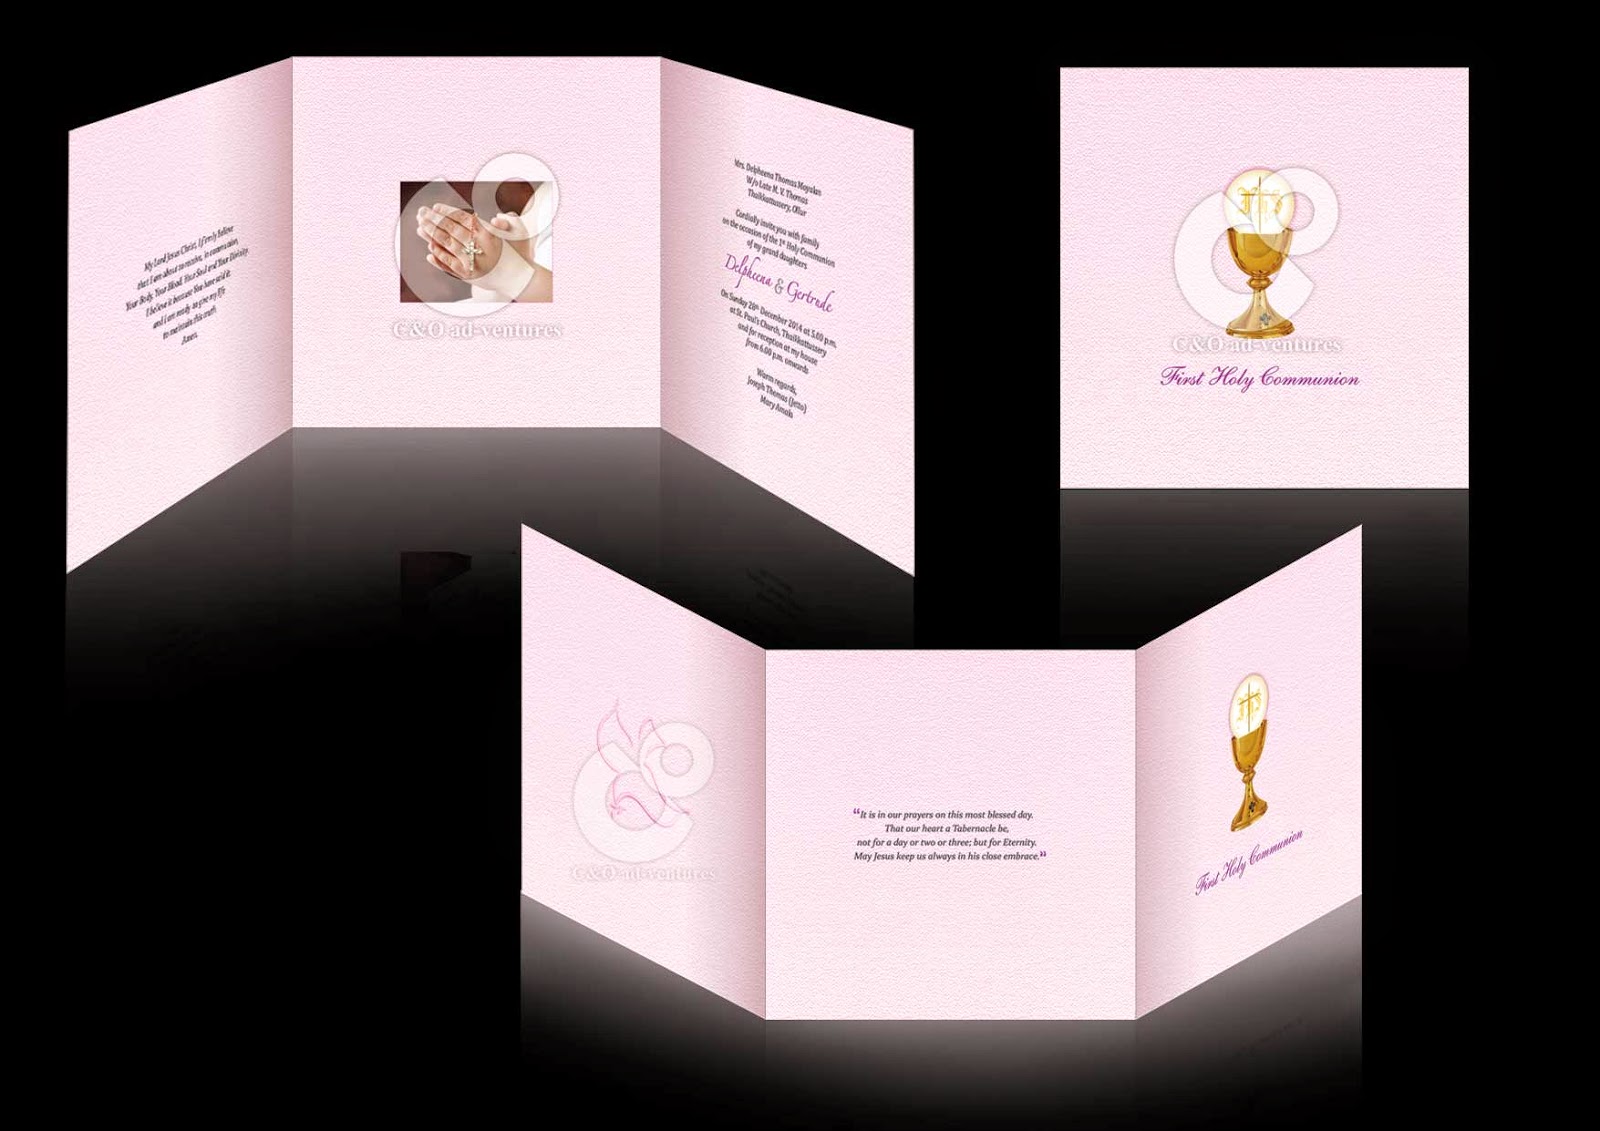 C & O ad-ventures: First Holy Communion Invitation Card